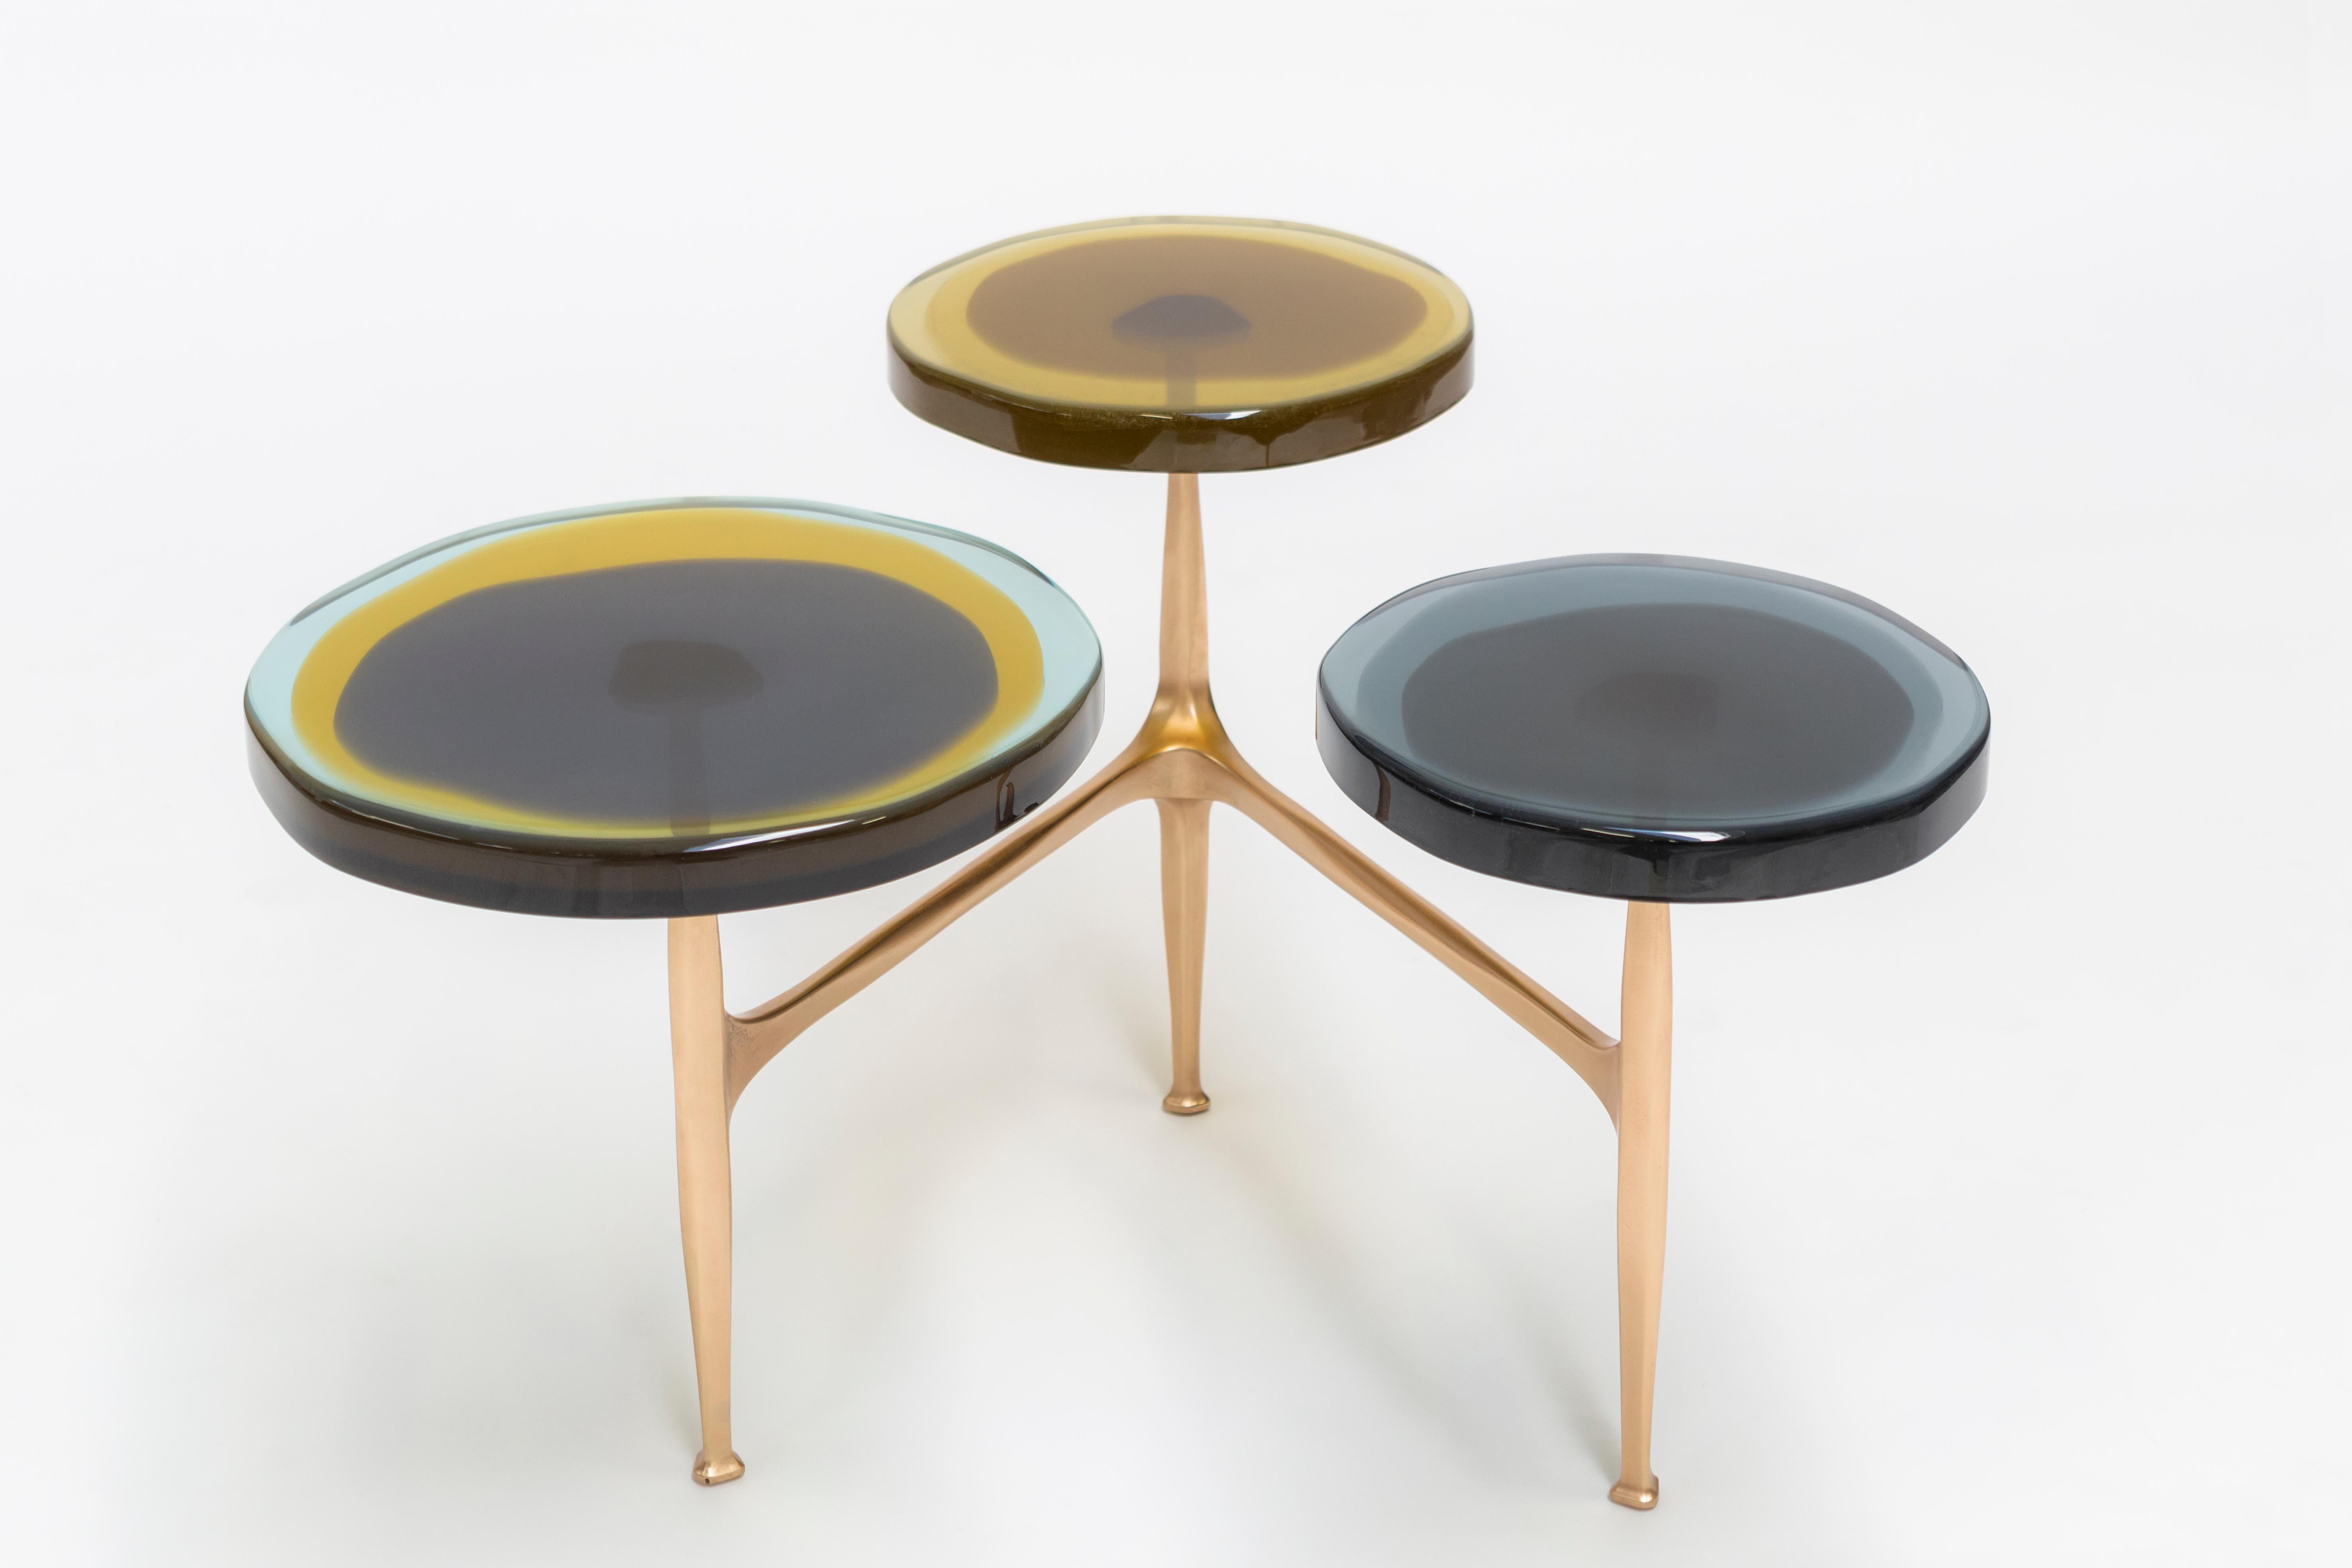 Modern Agatha Coffe Table 3 by Draga & Aurel Resin and Bronze, 21st Century For Sale